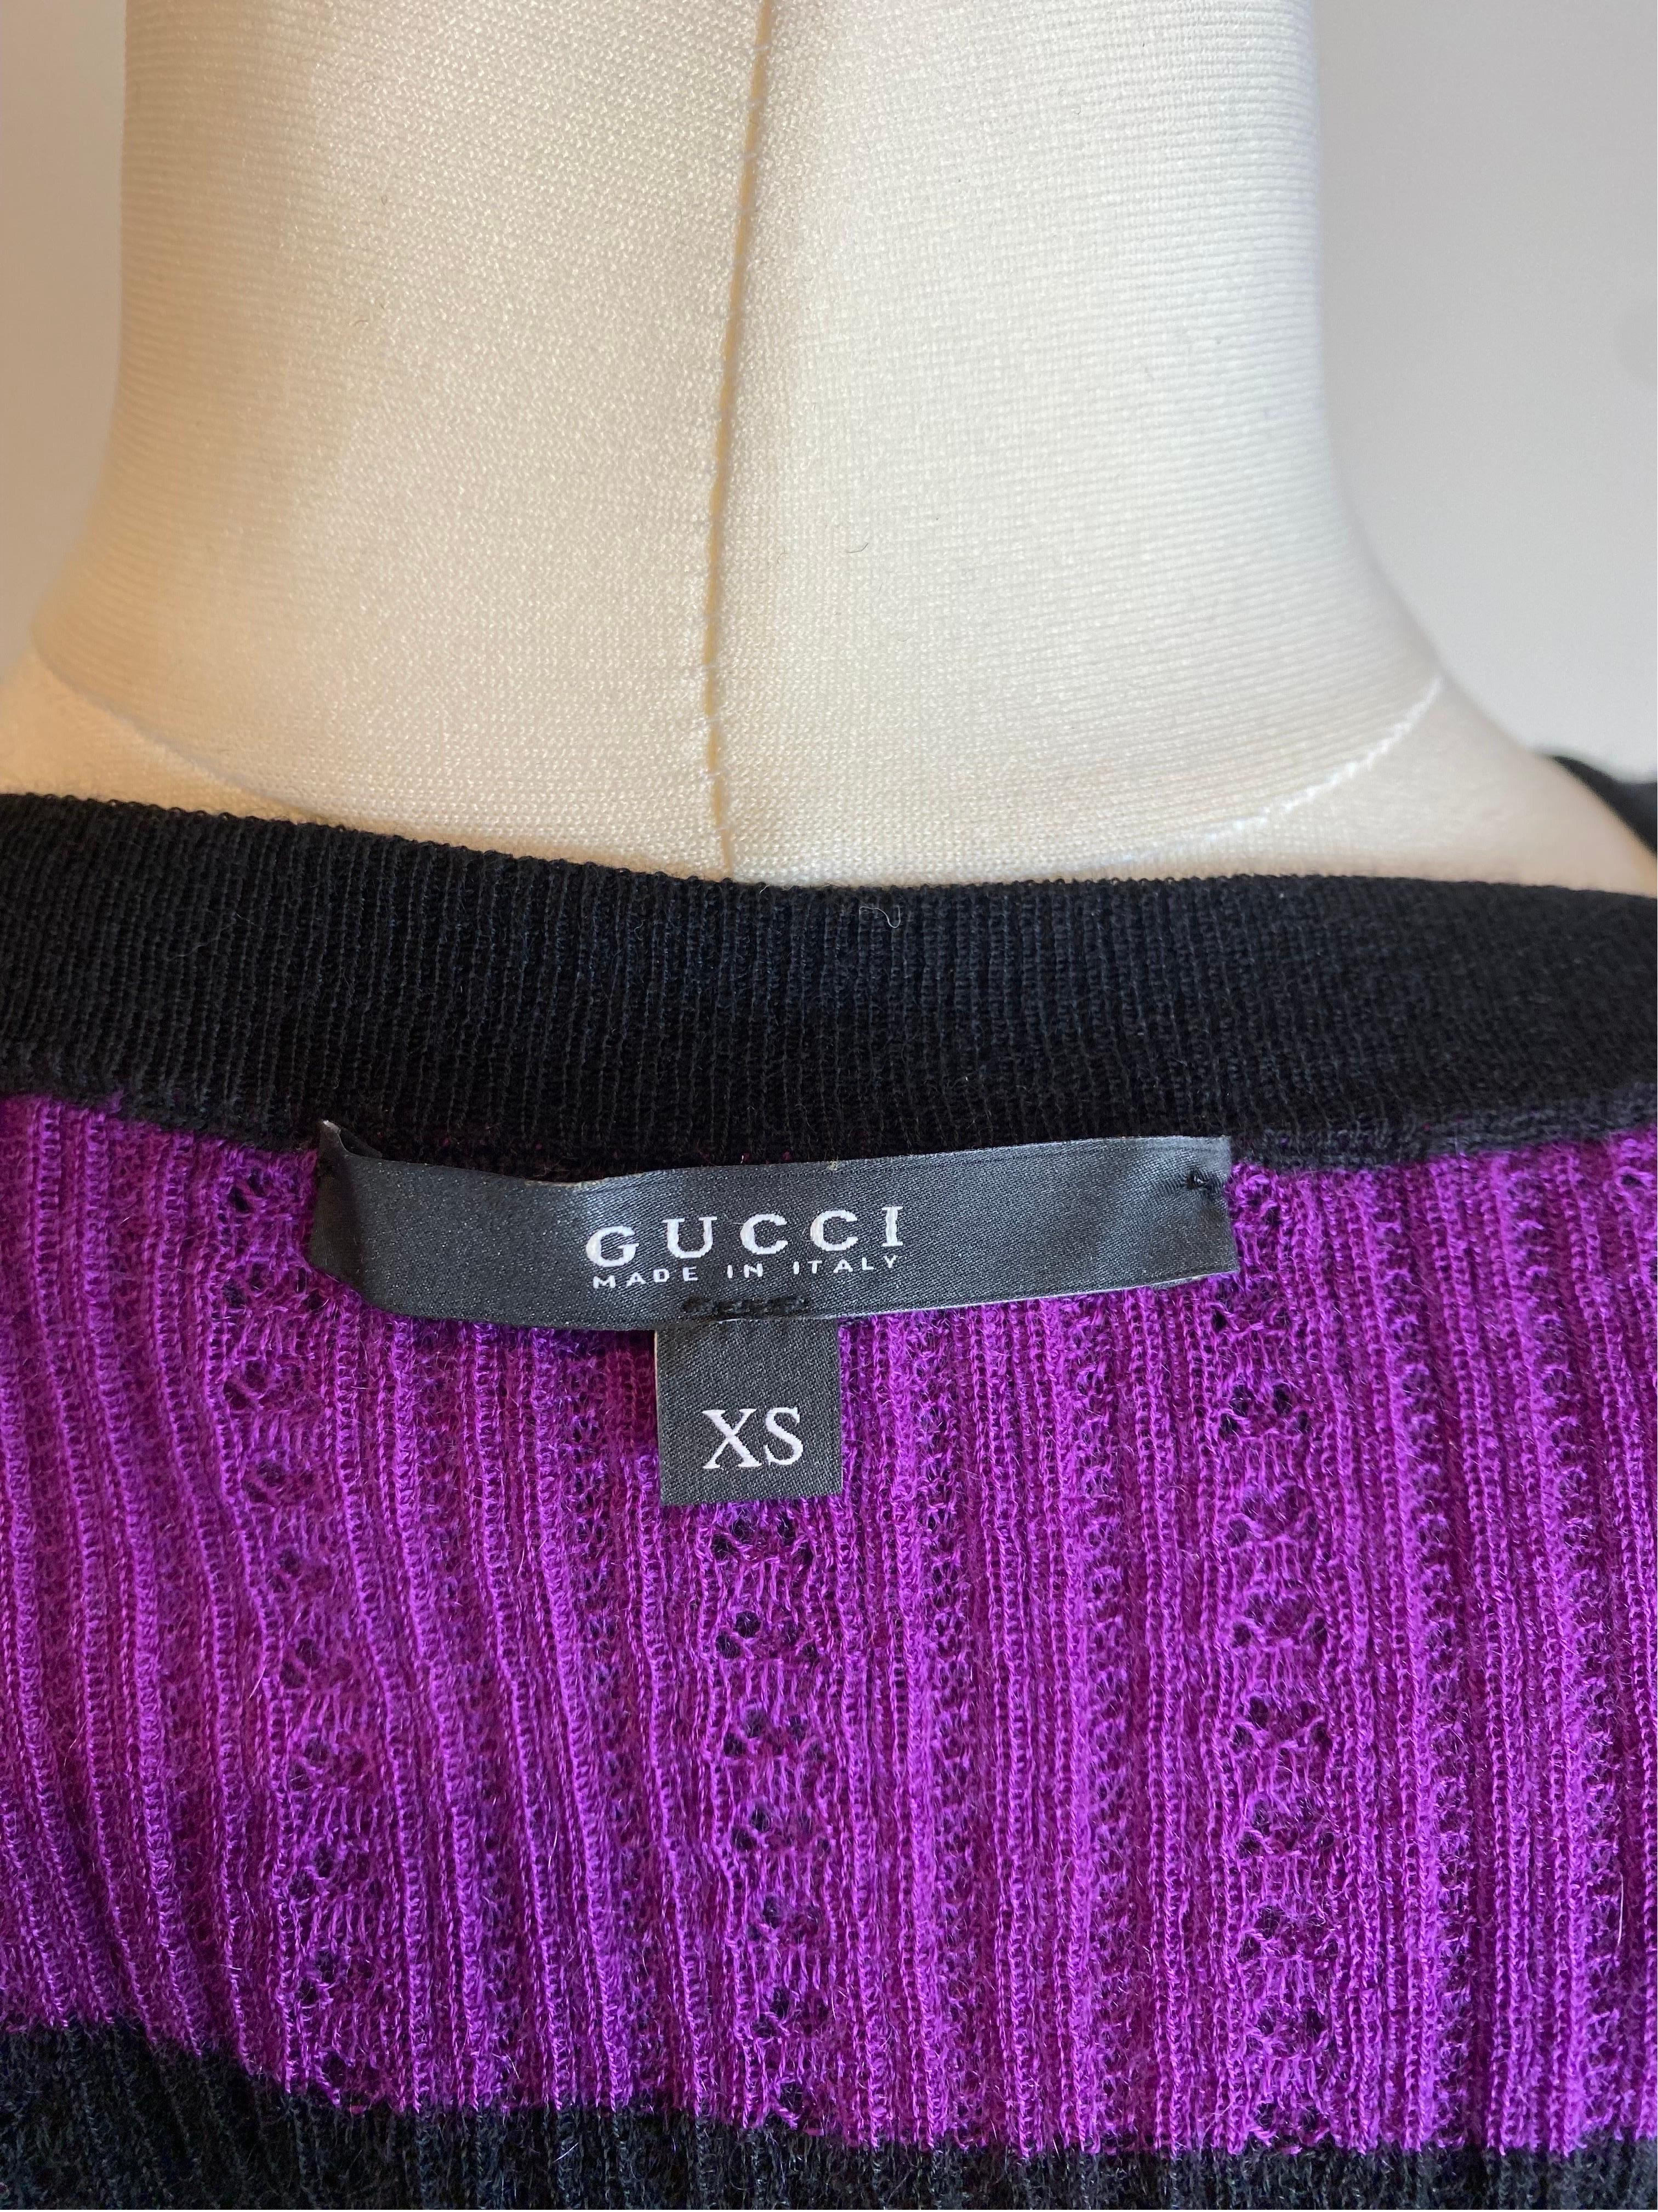 Gucci 2007 SS violet and red stripes top For Sale 3